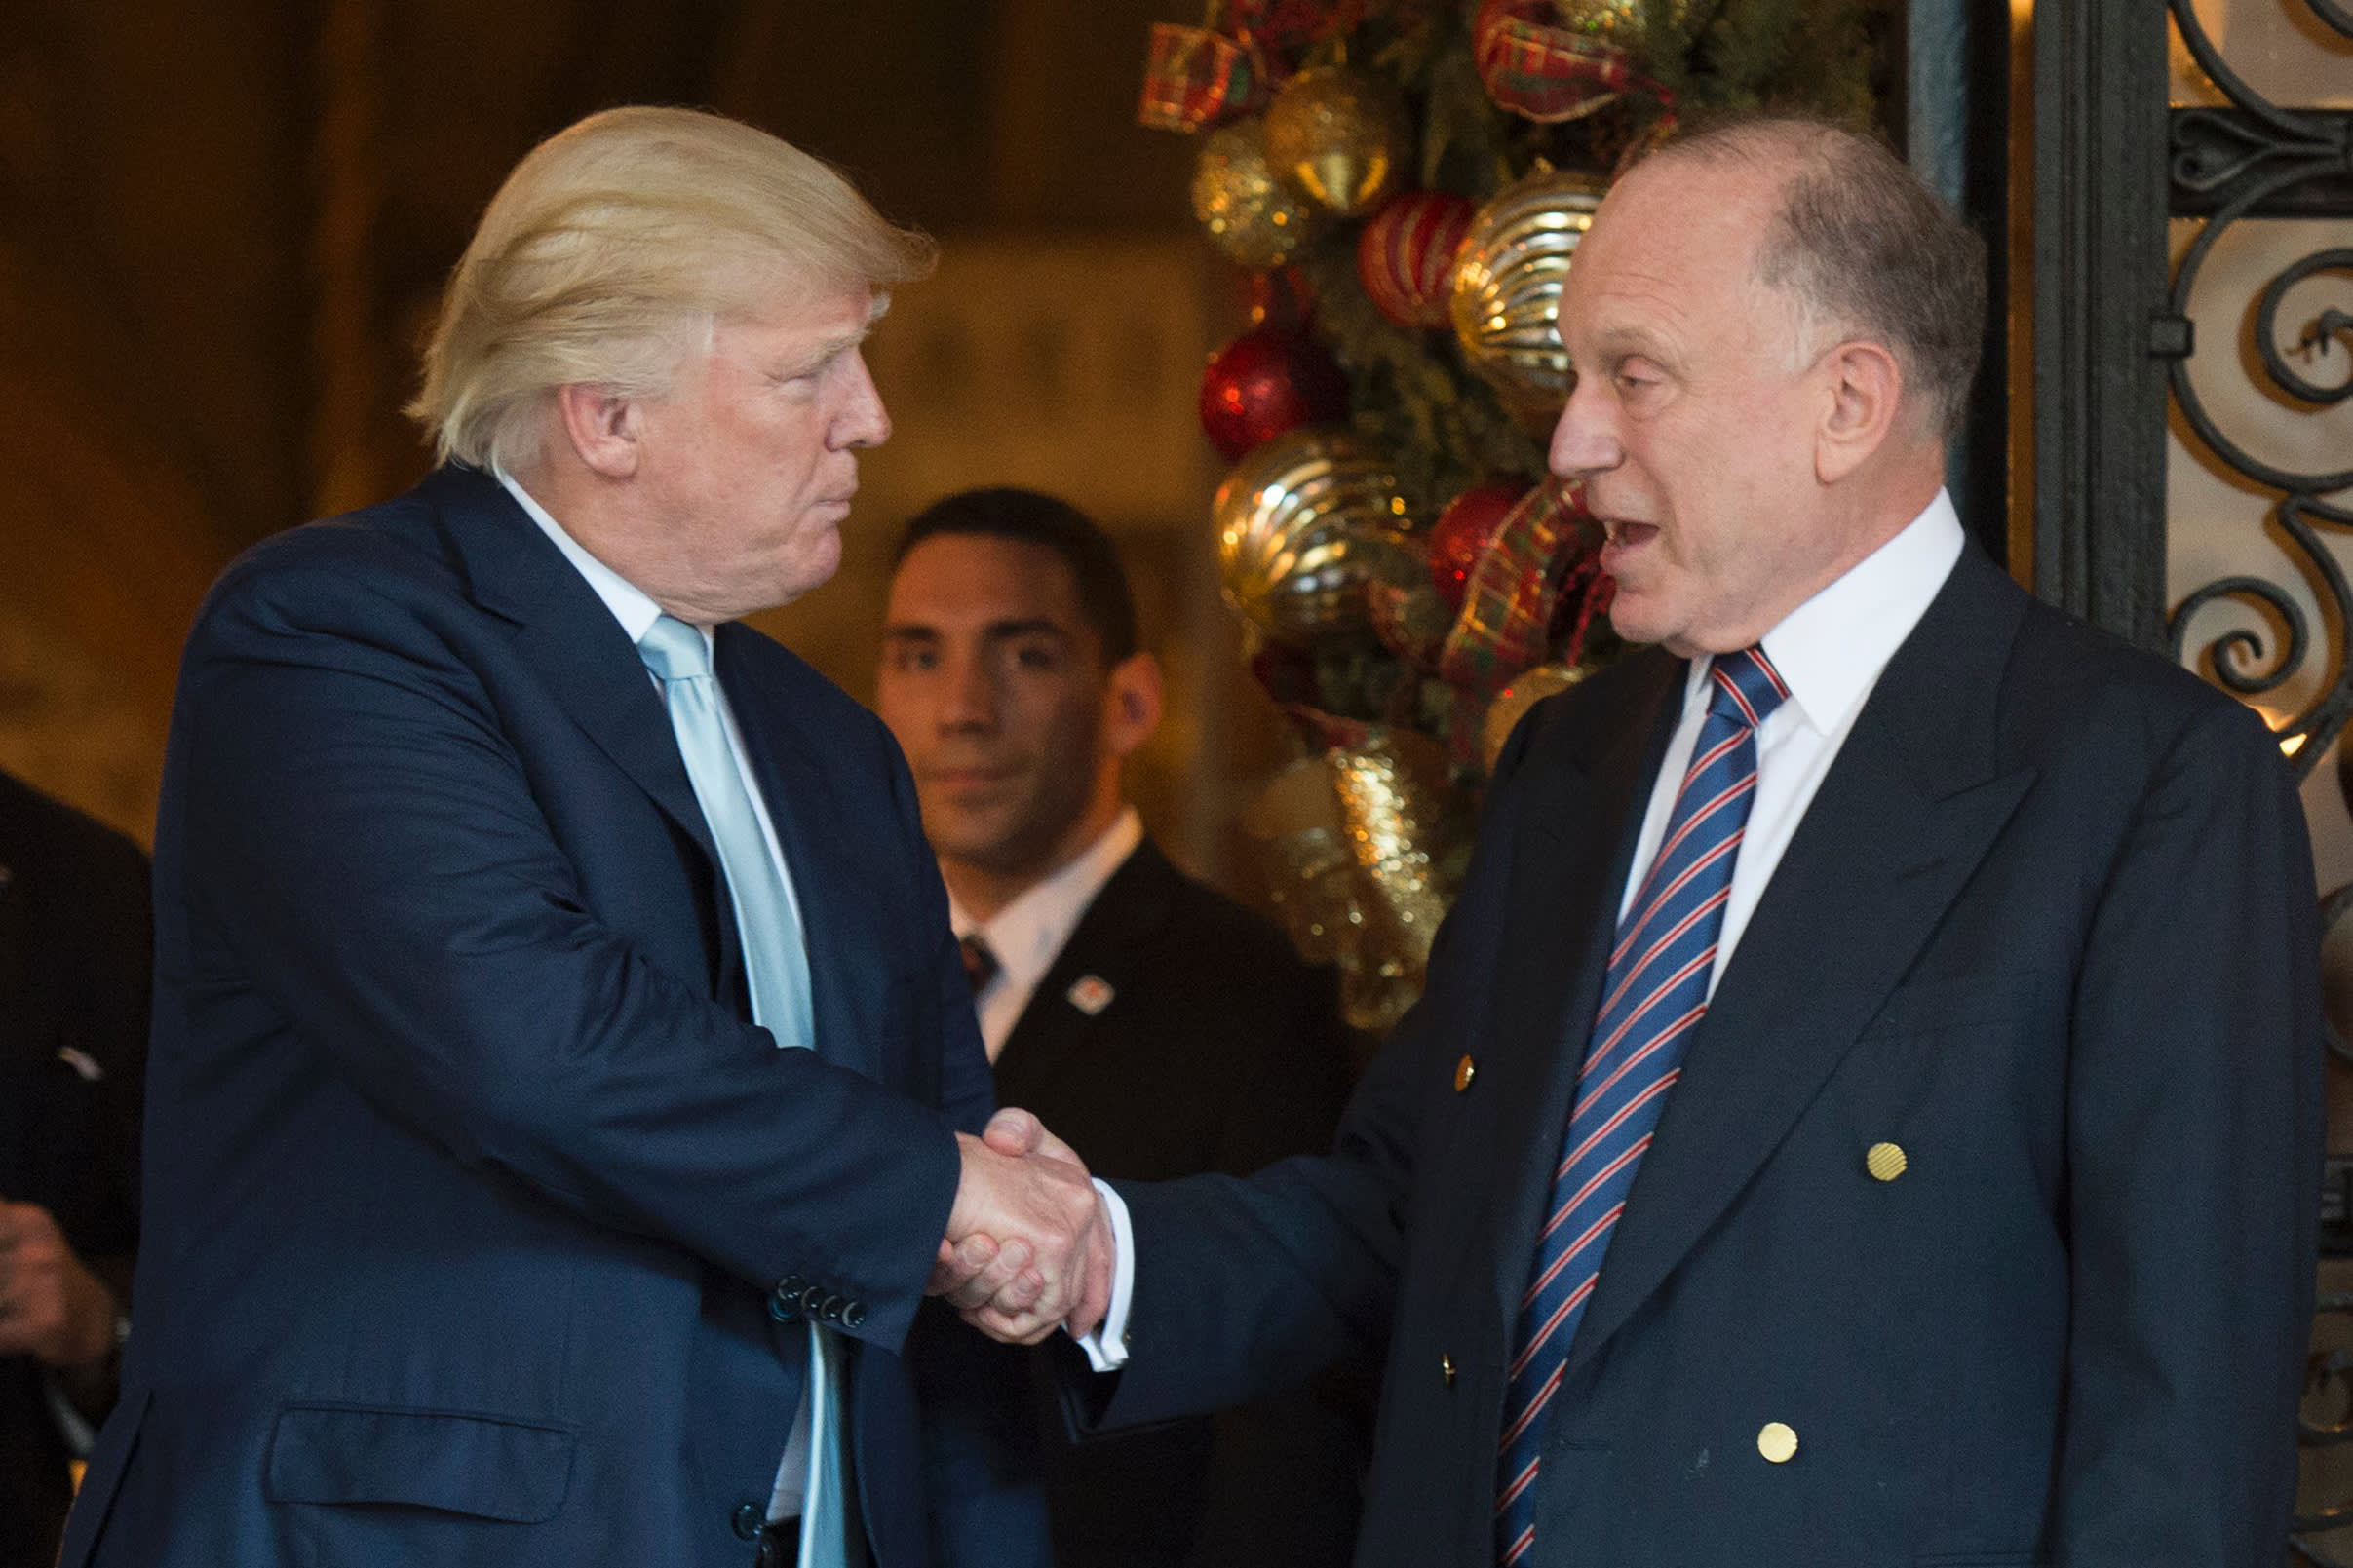 Billionaire Trump friend and donor Ronald Lauder goes quiet on the fundraising front